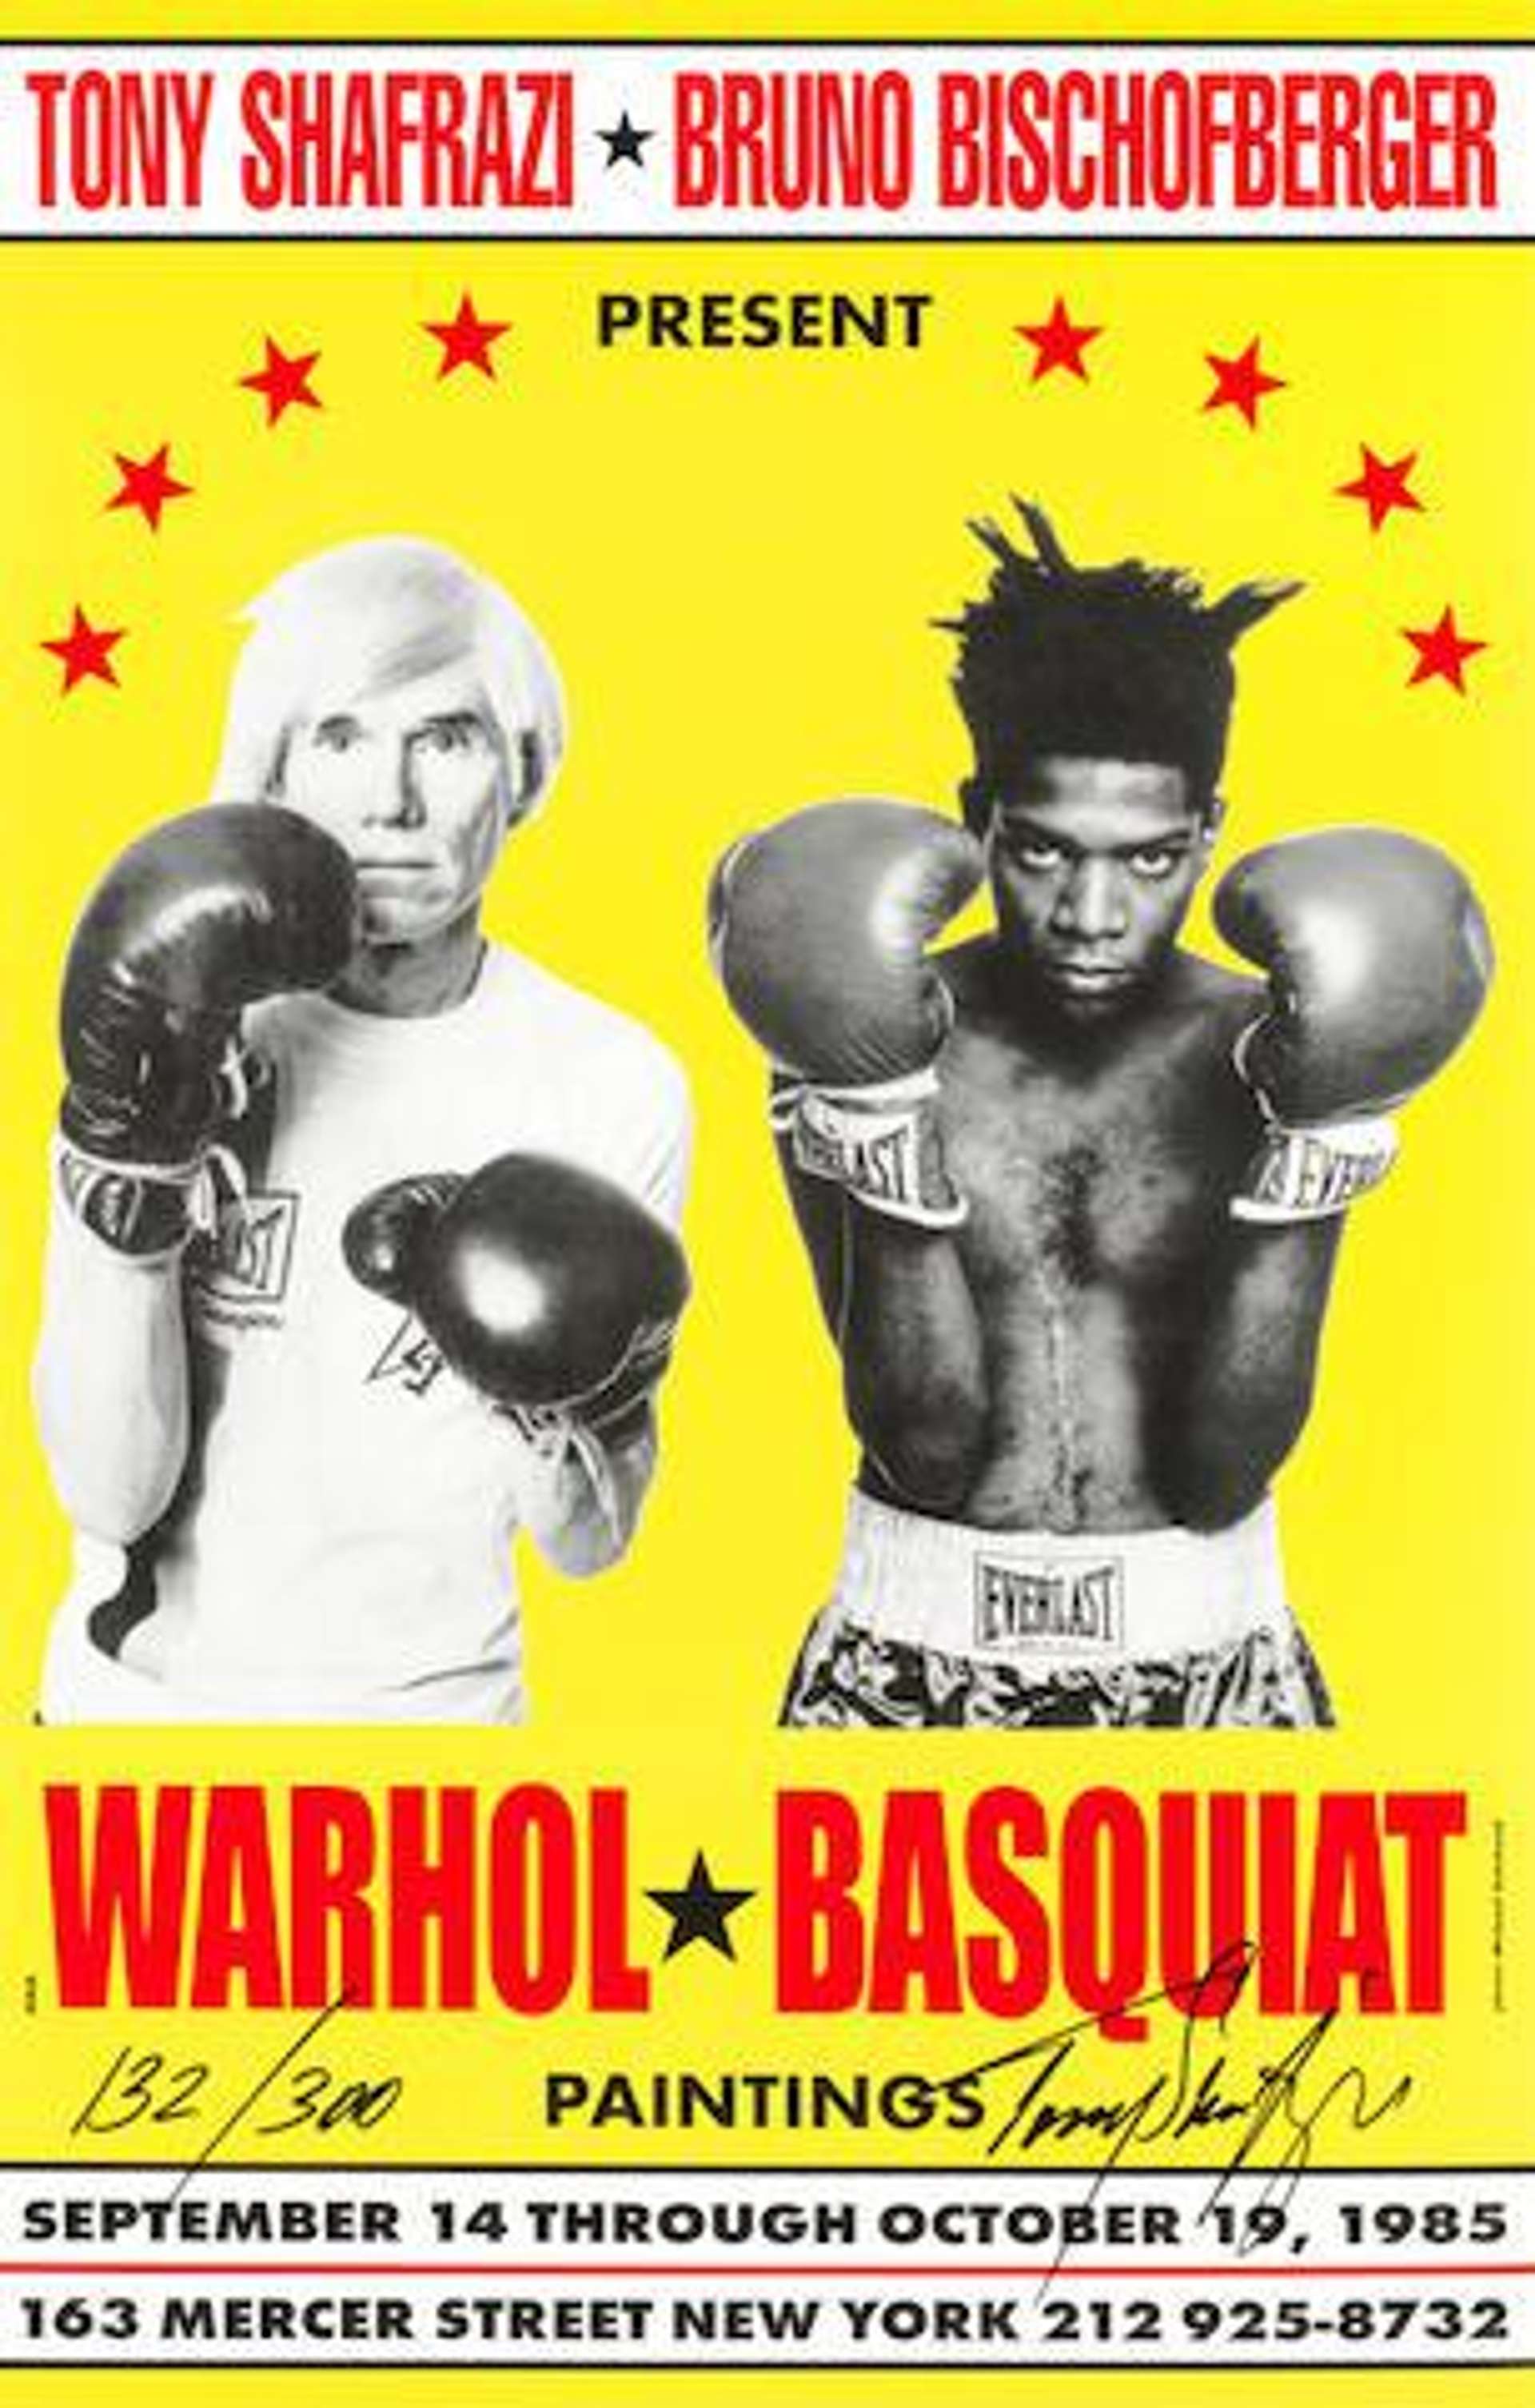 The poster of Jean-Michel Basquiat and Andy Warhol's joint exhibition, showing both artists dressed in boxing attire. Their photograph is monochrome against a bright yellow background.